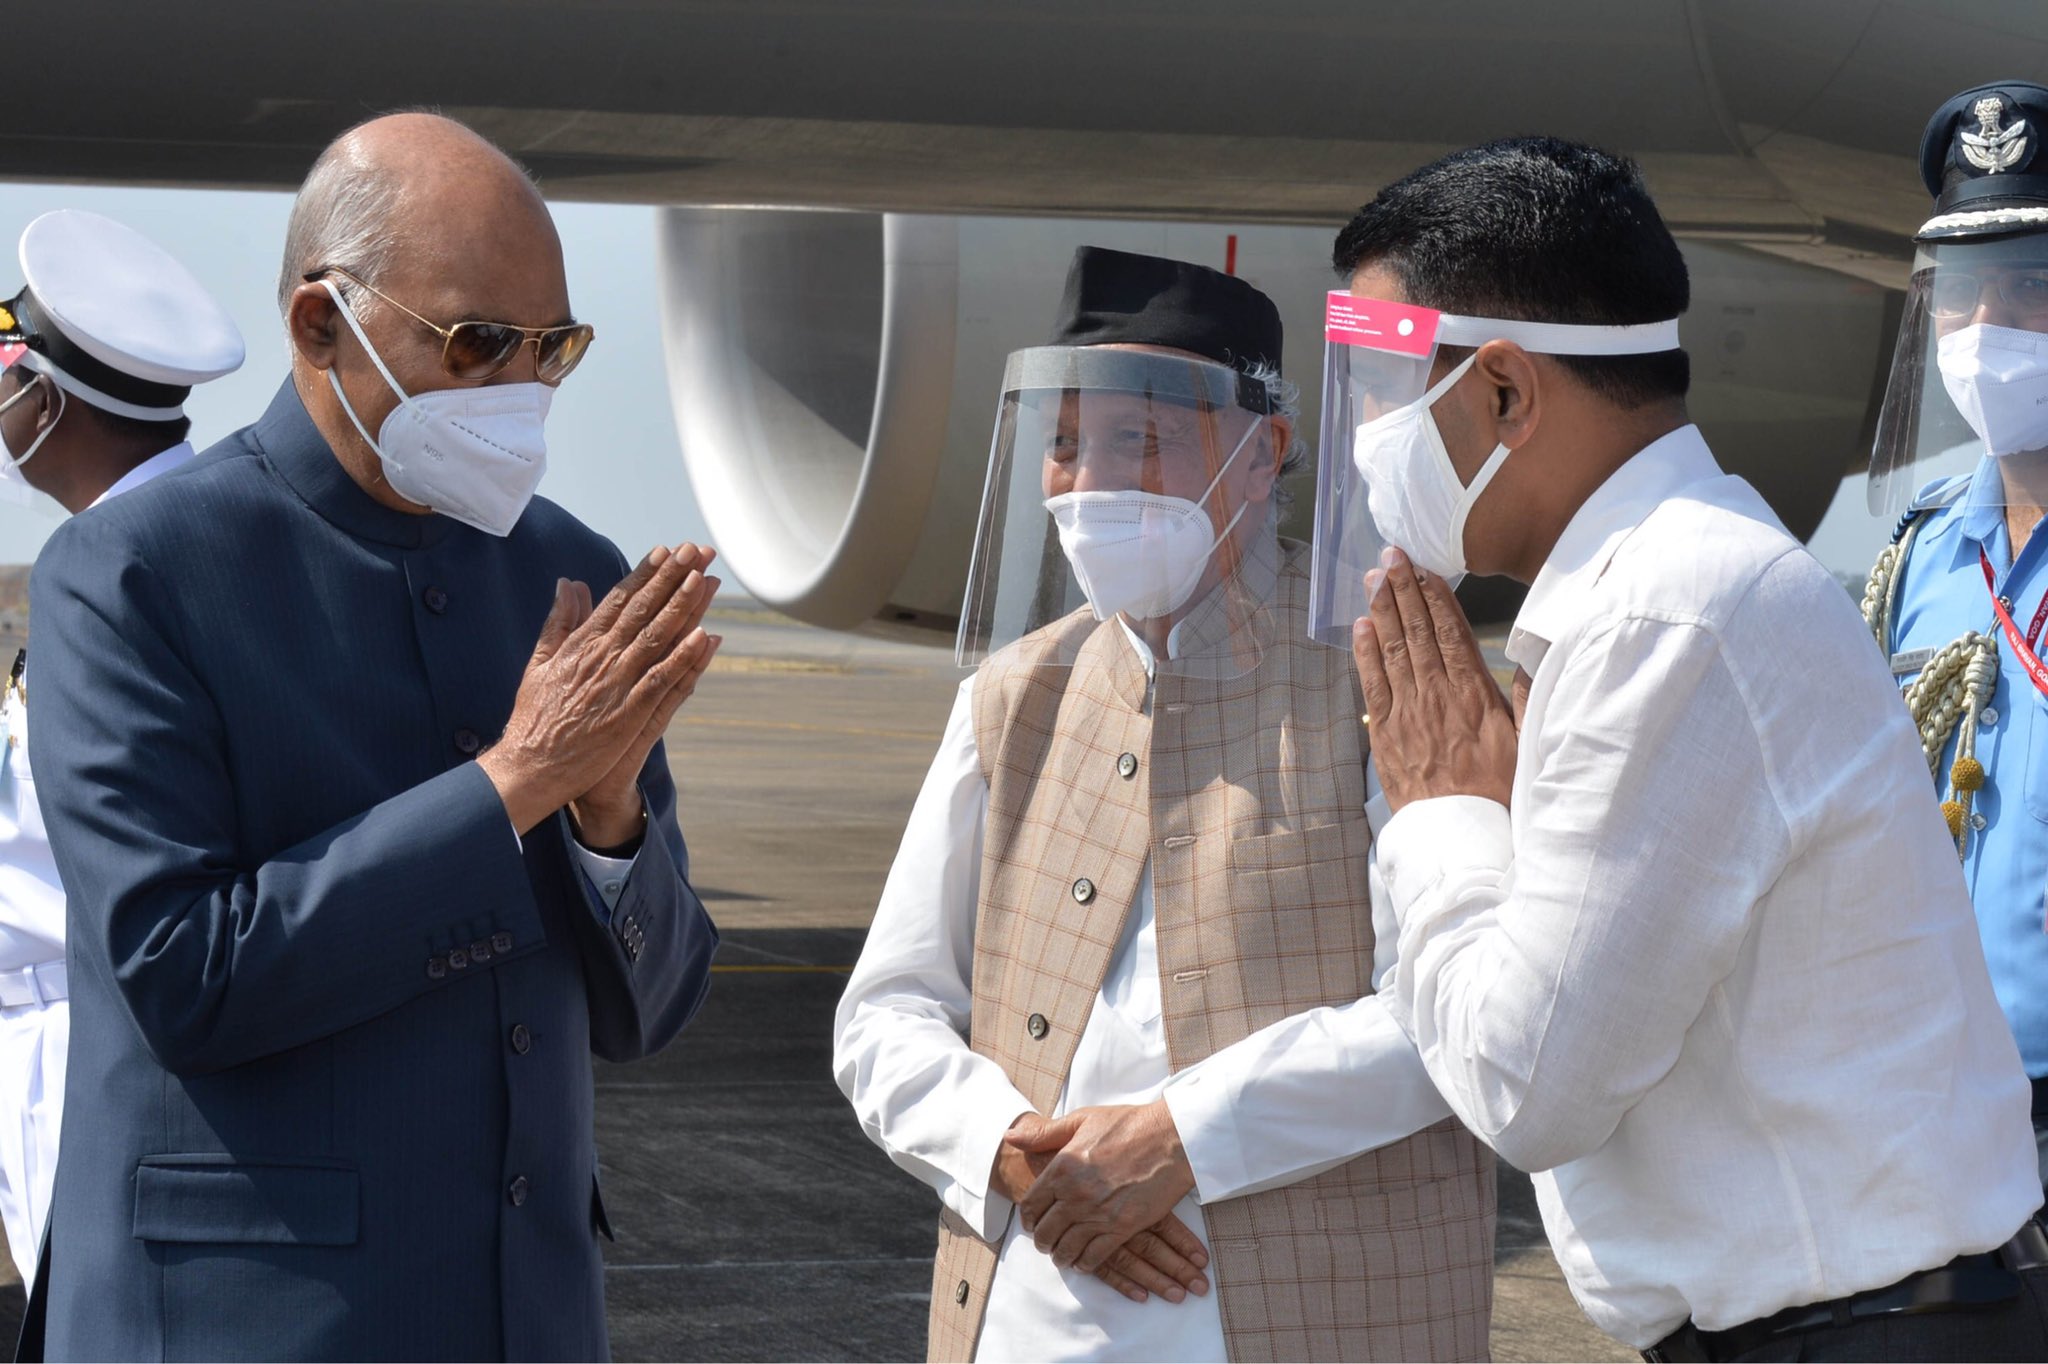 President Ram Nath Kovind arrived in Goa as part of his two-day visit, during which he will attend Goa's 60th Liberation Day celebrations.